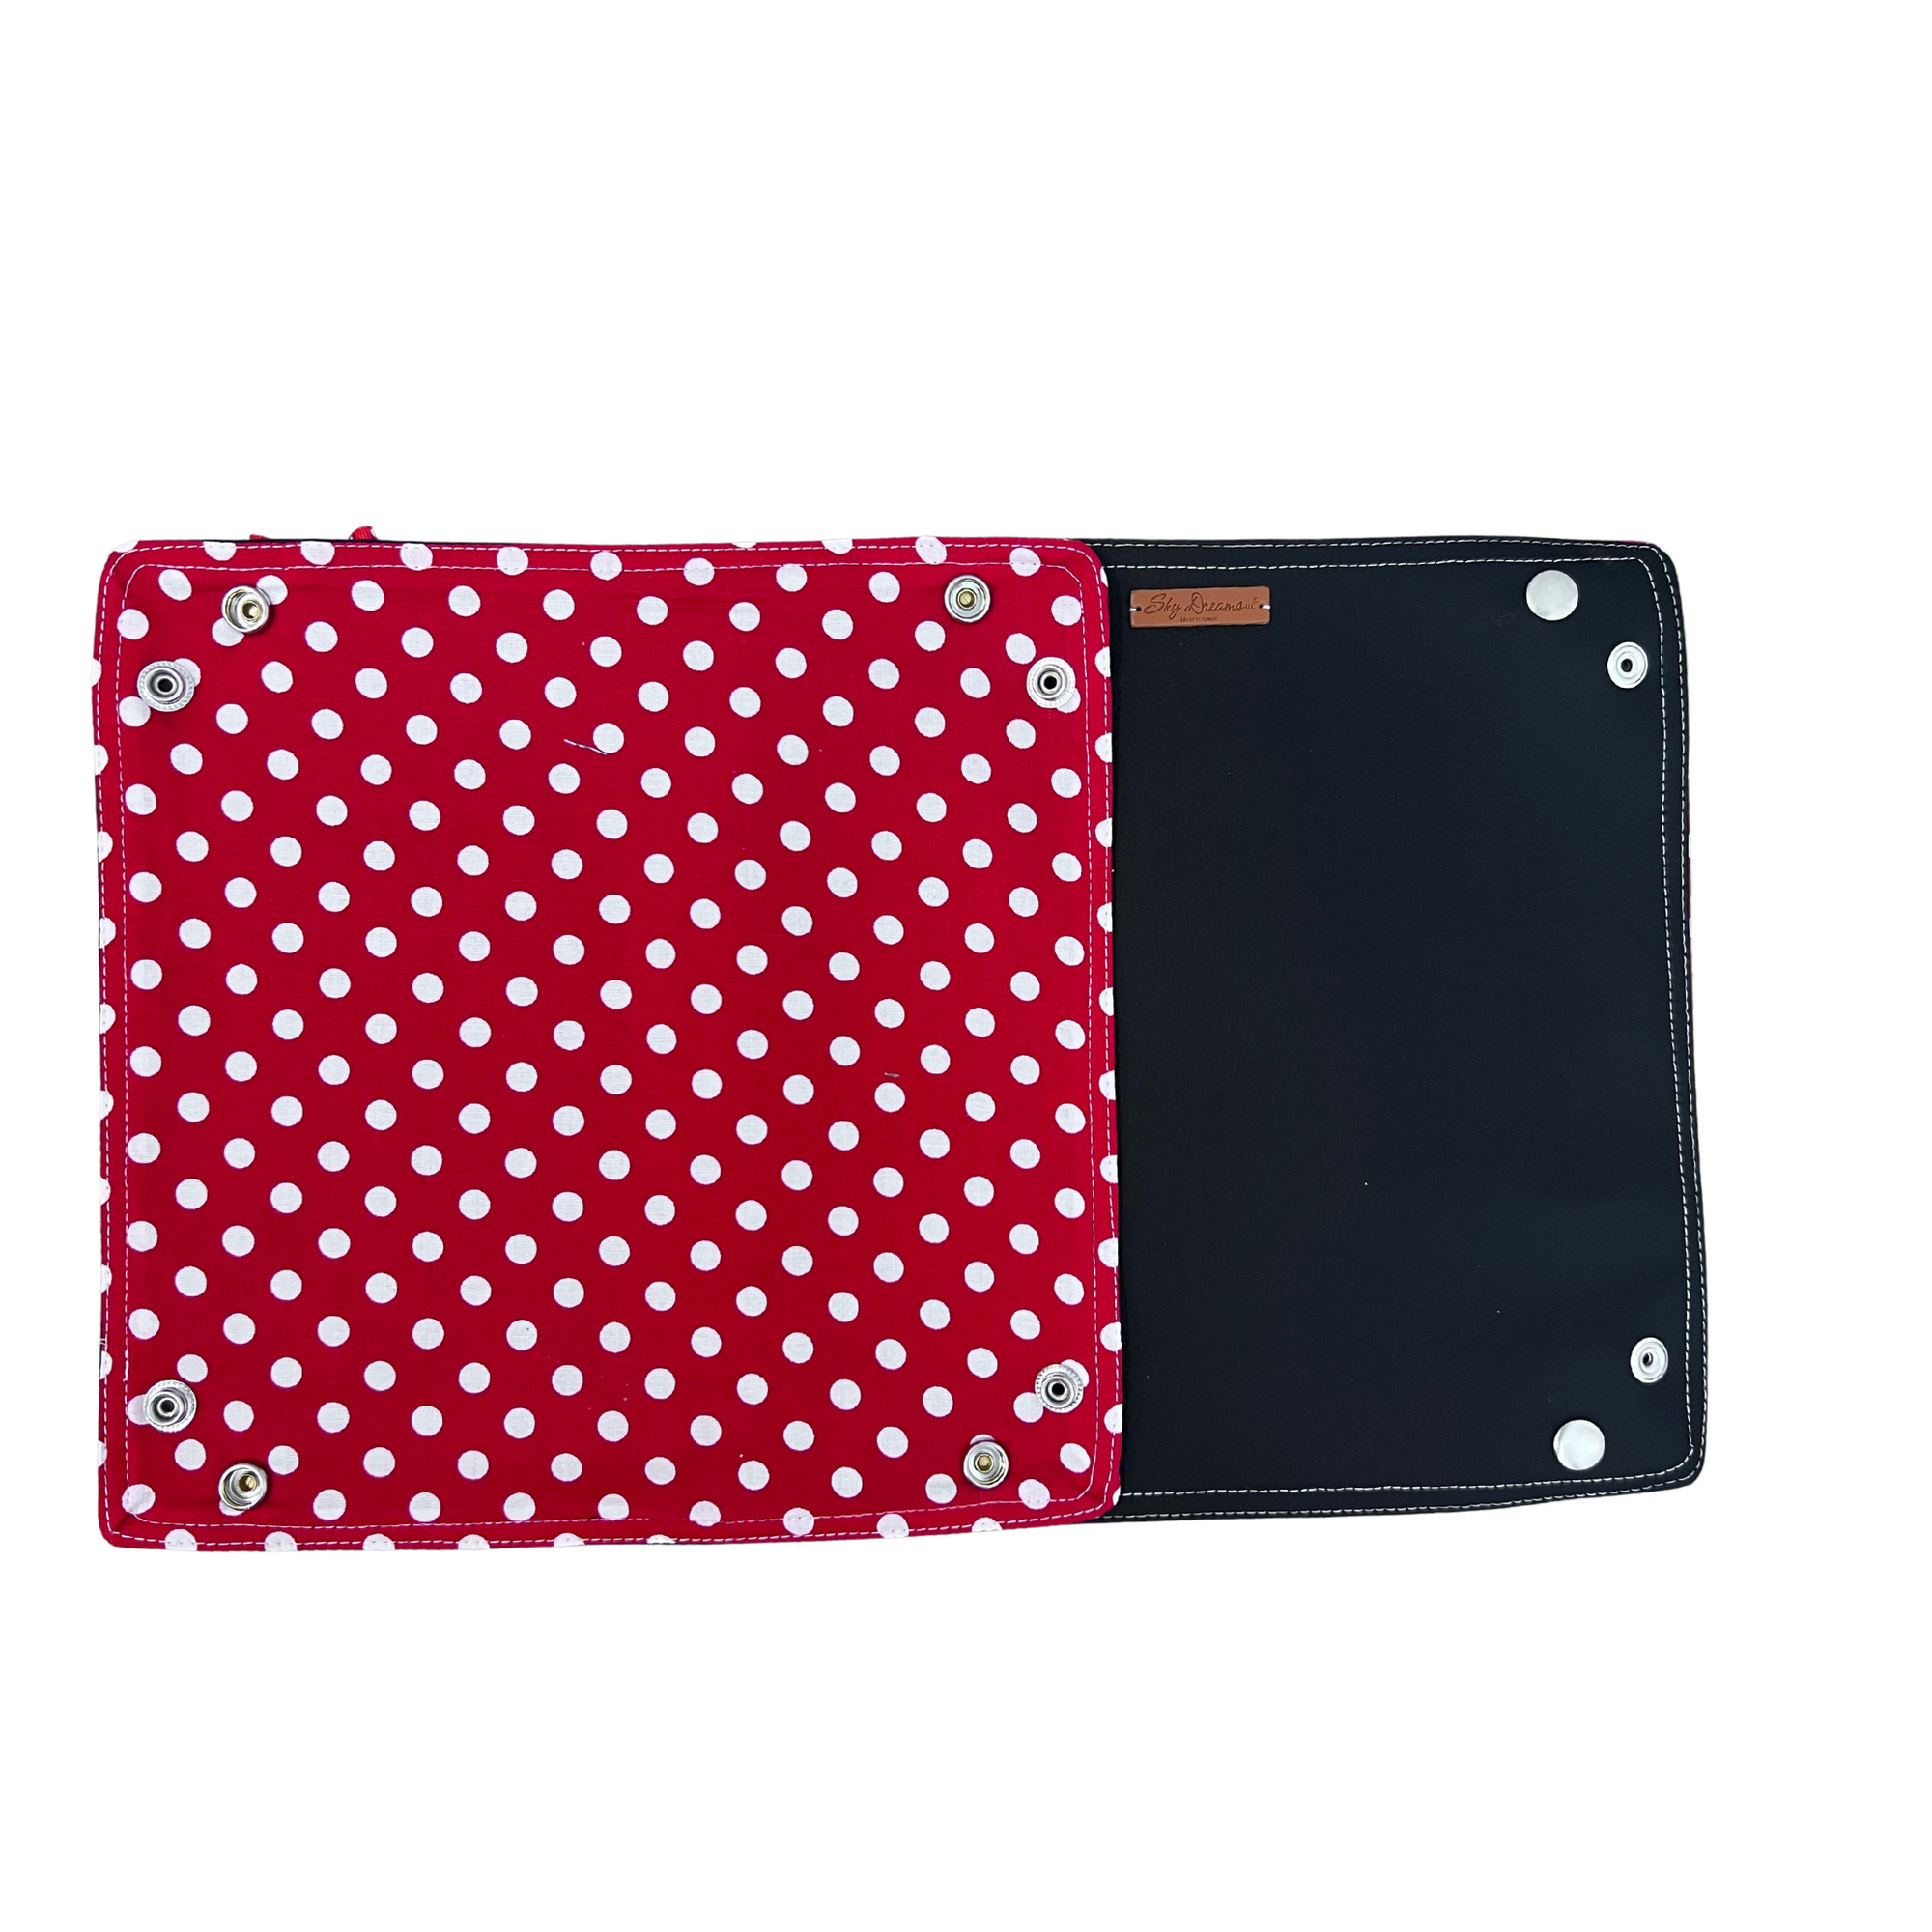 X-Large Travel Valet-Magical Collection Large Red and White Dots no Bow